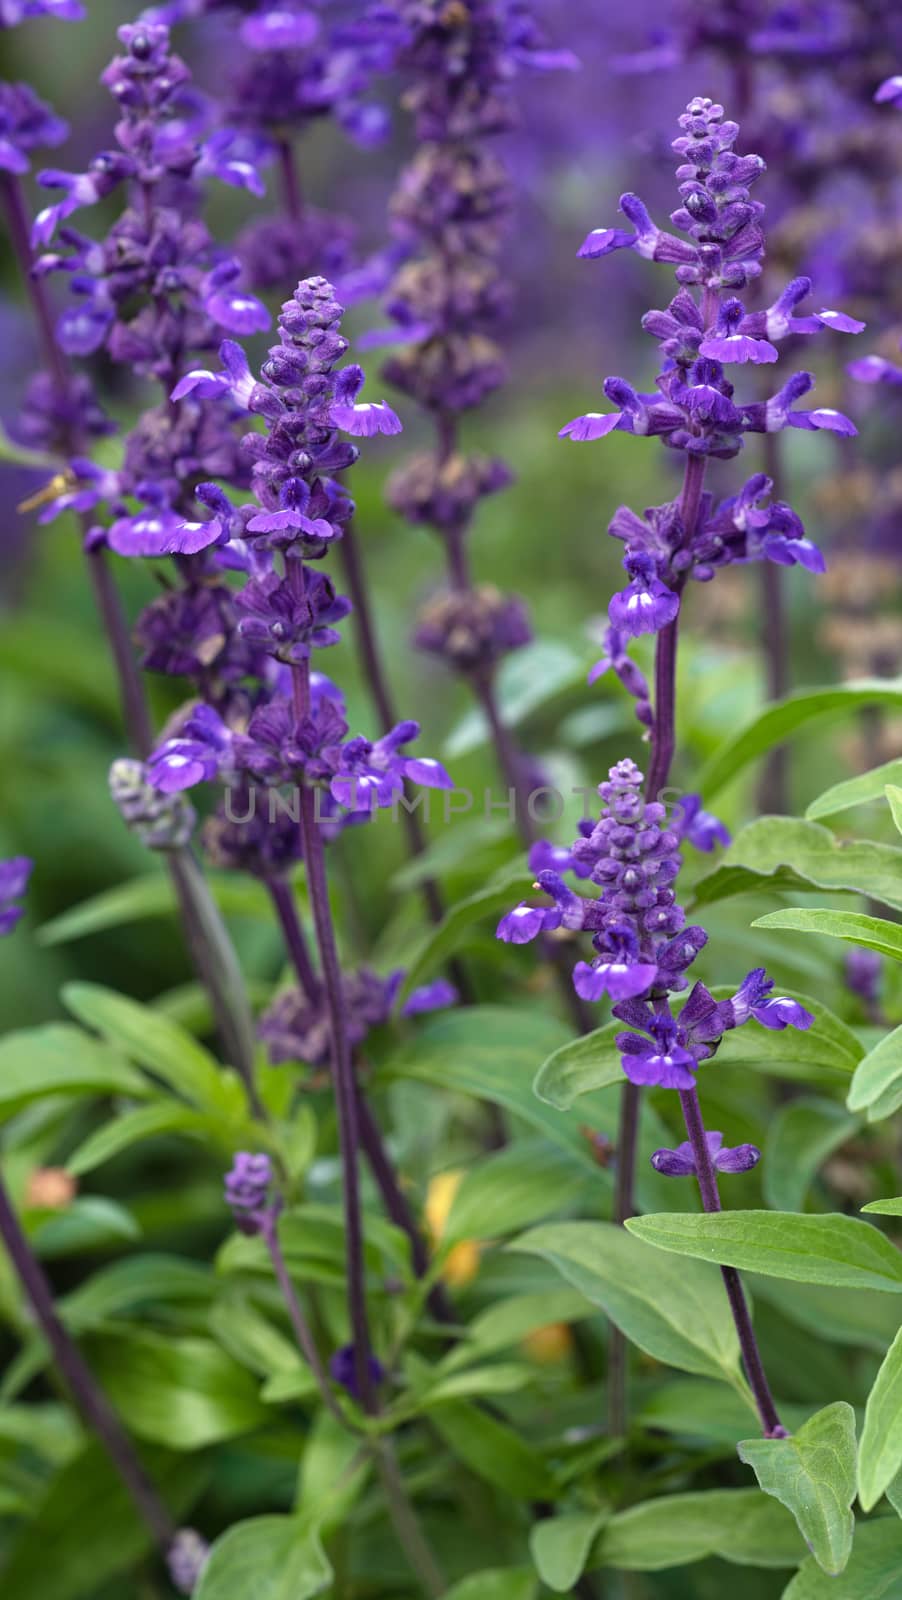 Close up image of Blue Sage (Salvia farinacea), flowers of summer